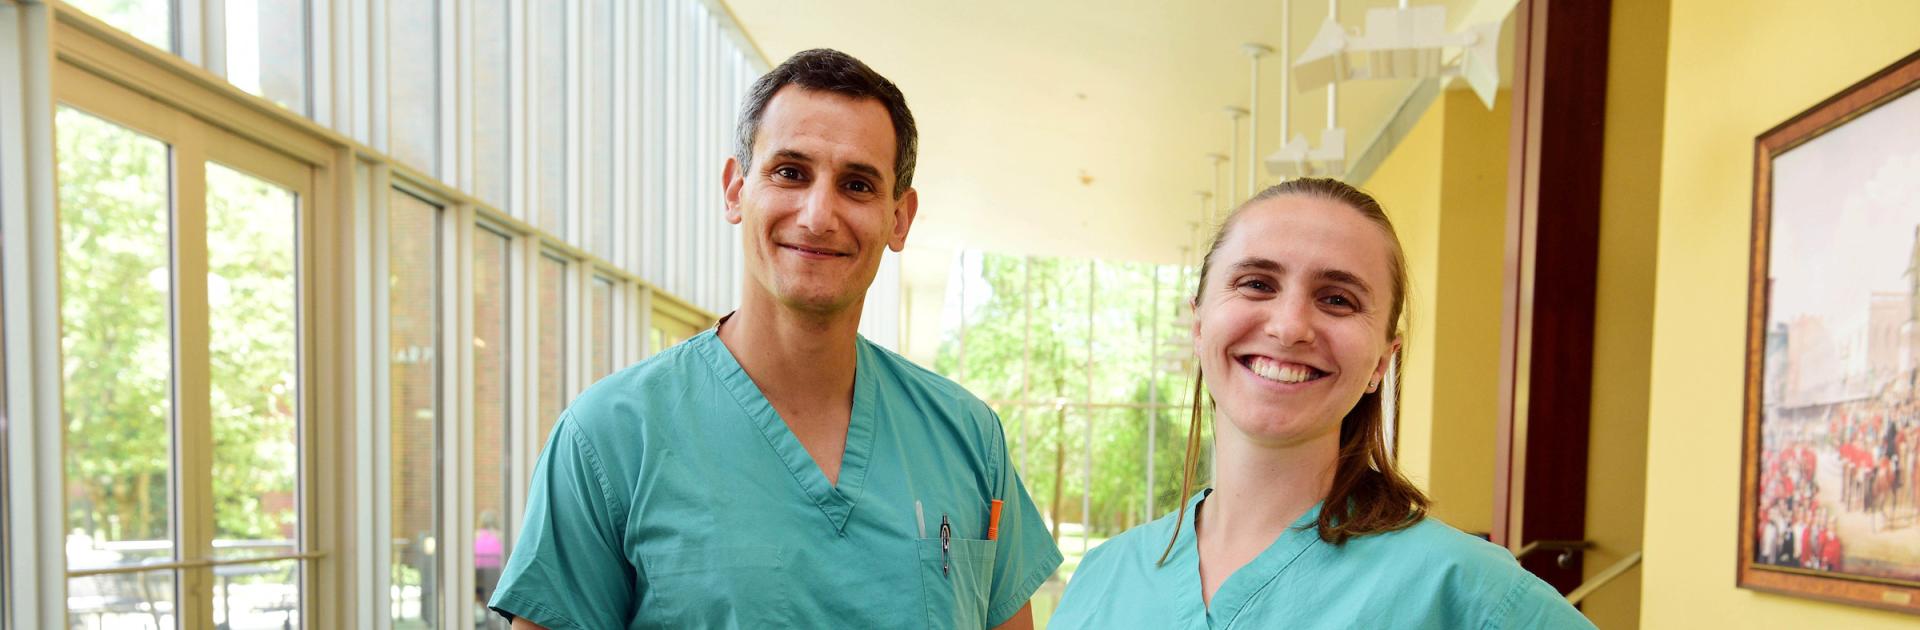 two students in scrubs